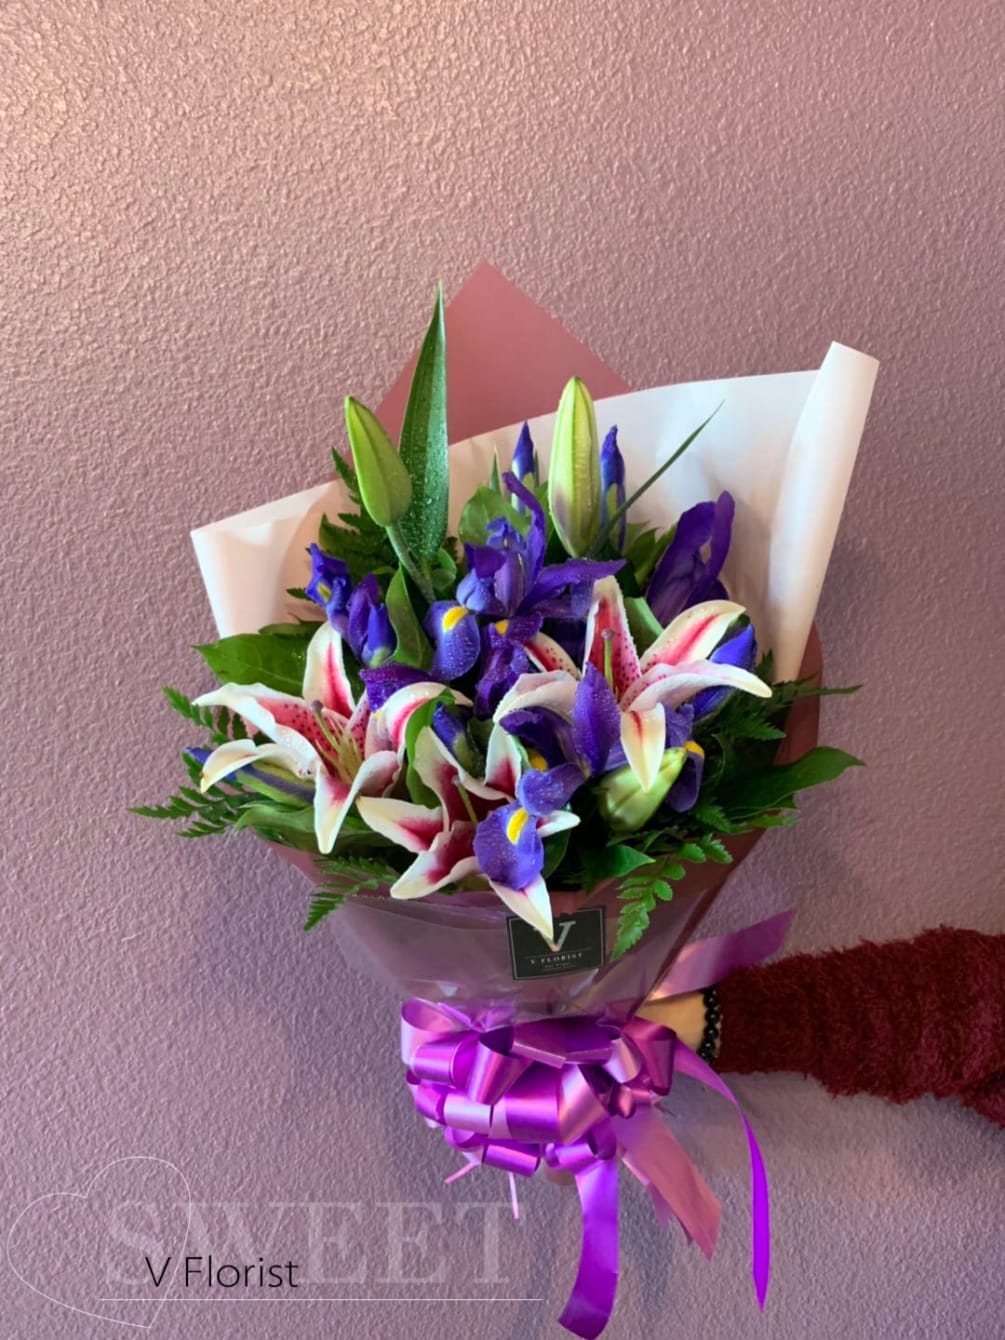 Six iris join with star fighter lilies  in a simple wrapped